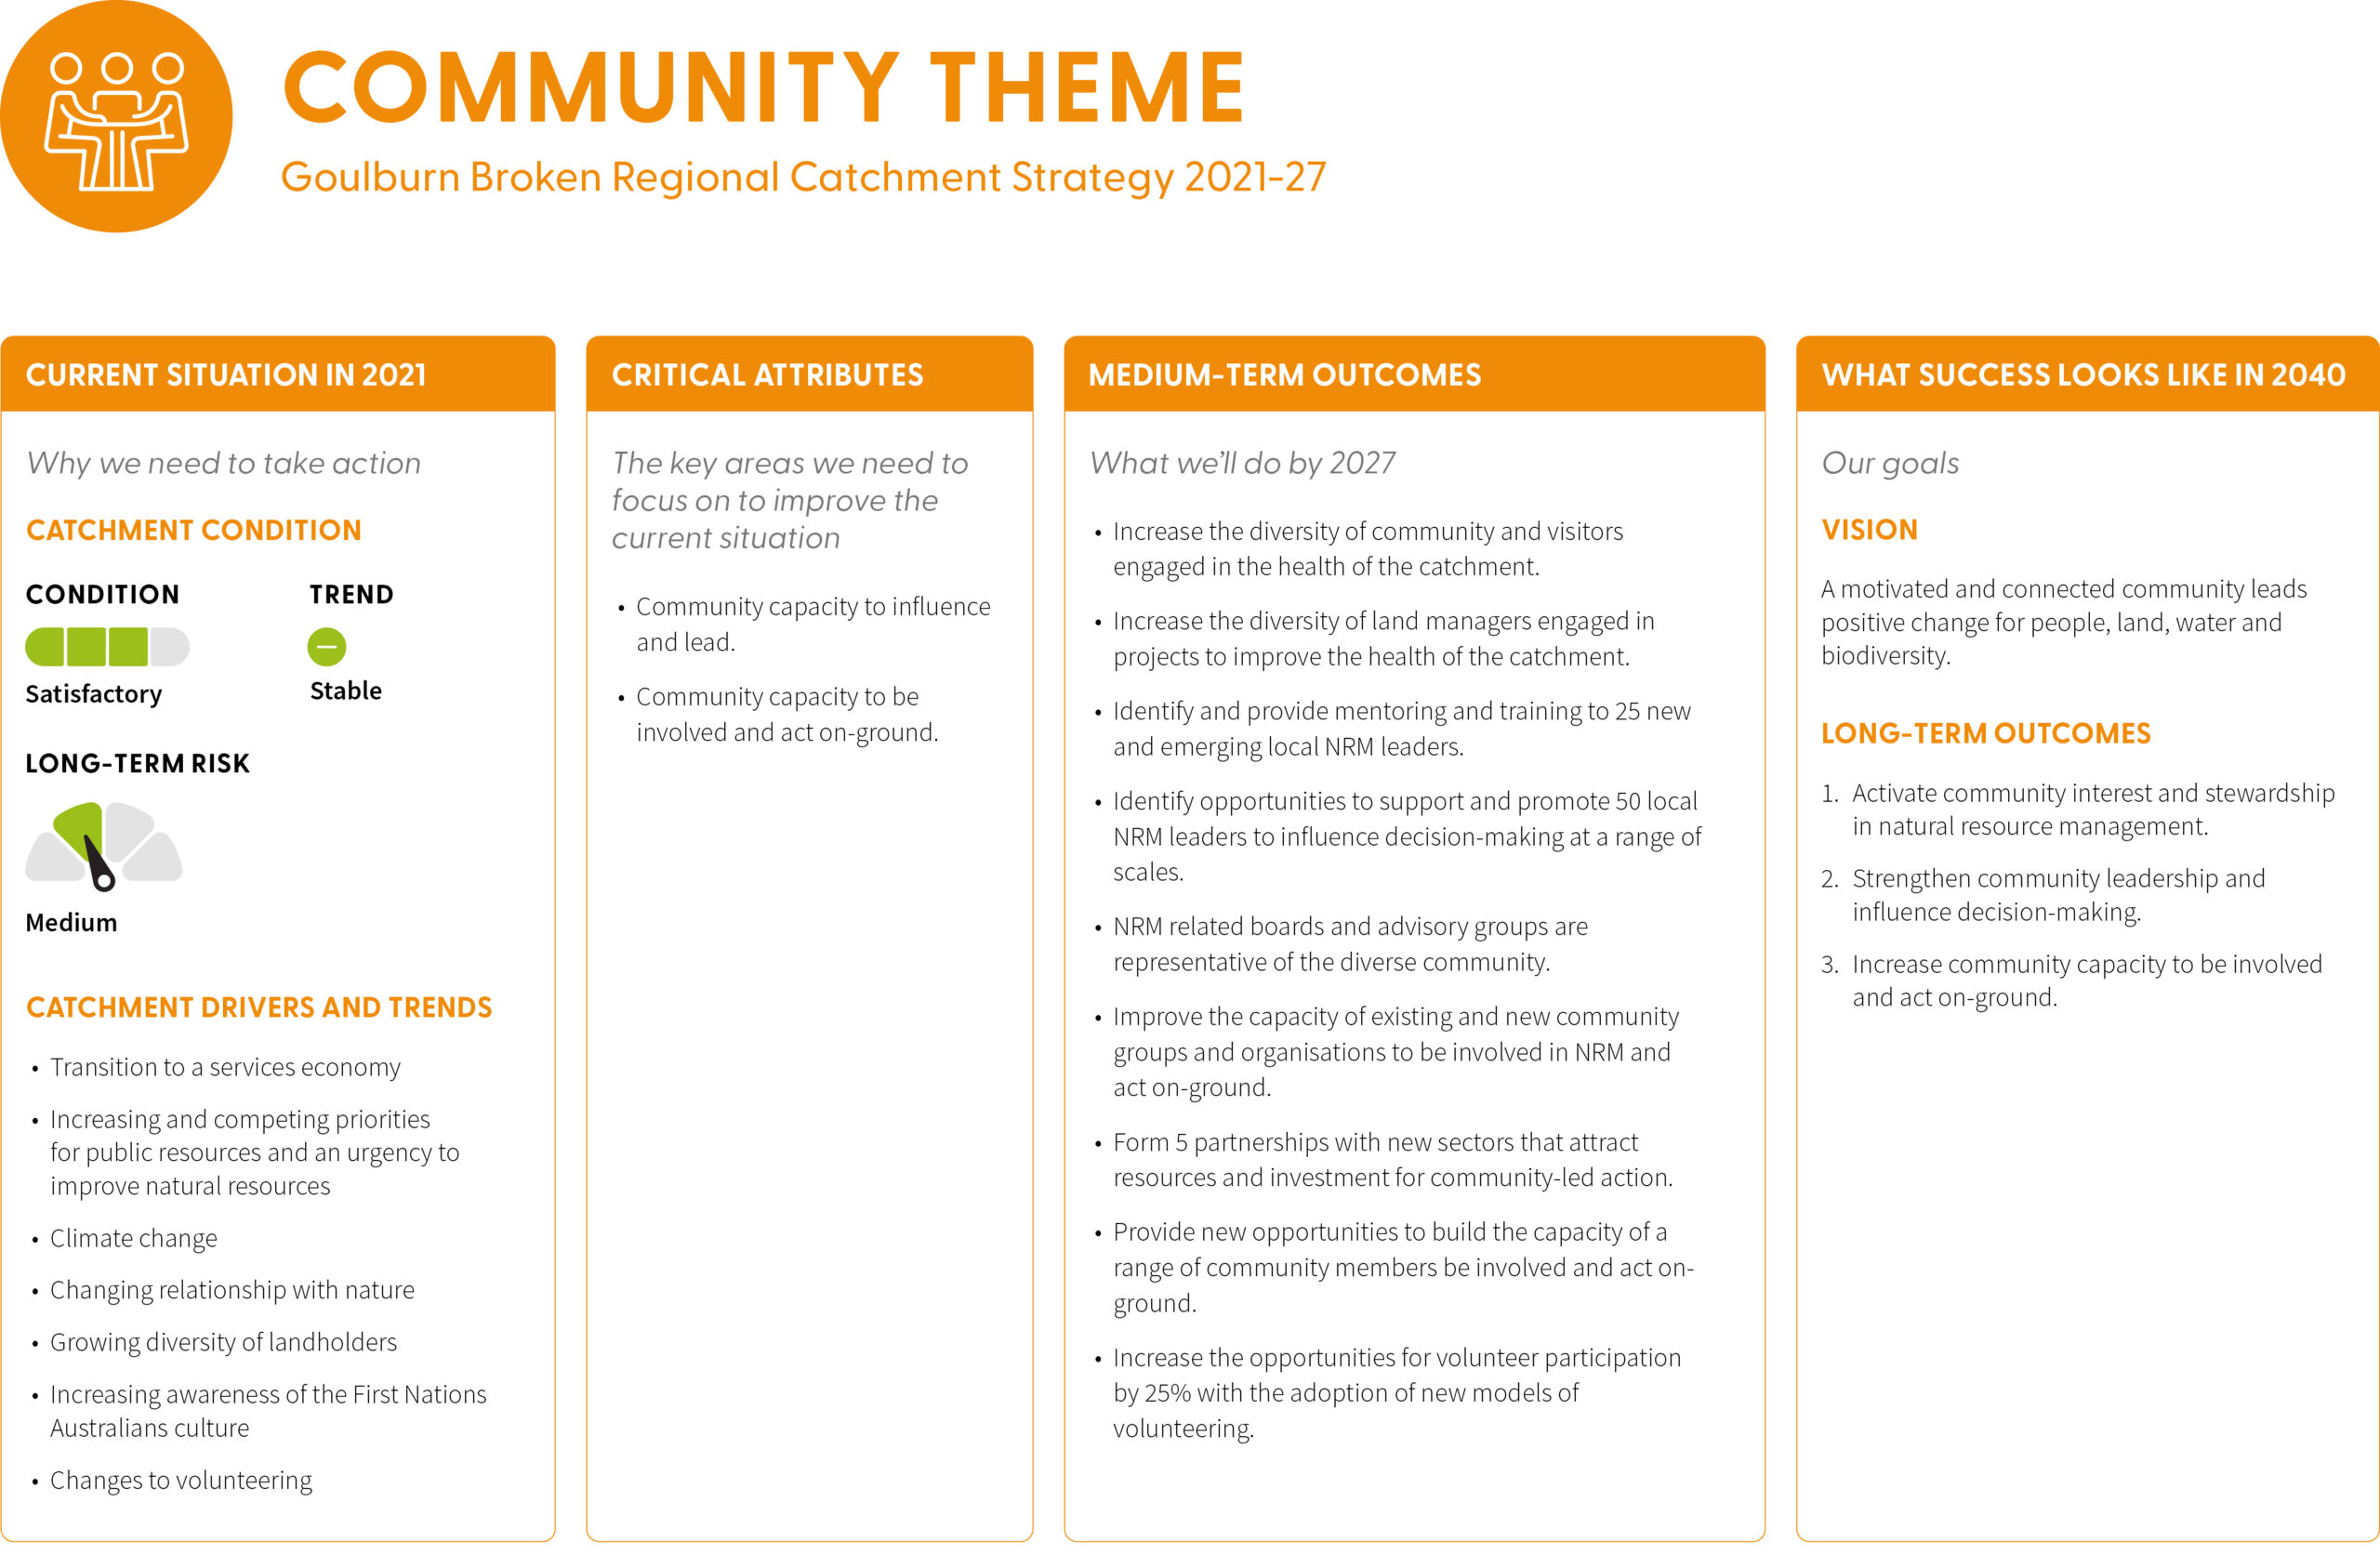 A diagram summarising the community theme content of the strategy, with four main sections: current situation in 2021, critical attributes, medium-term outcomes and what success looks like in 2040. The content of the diagram is described in the information below the diagram.